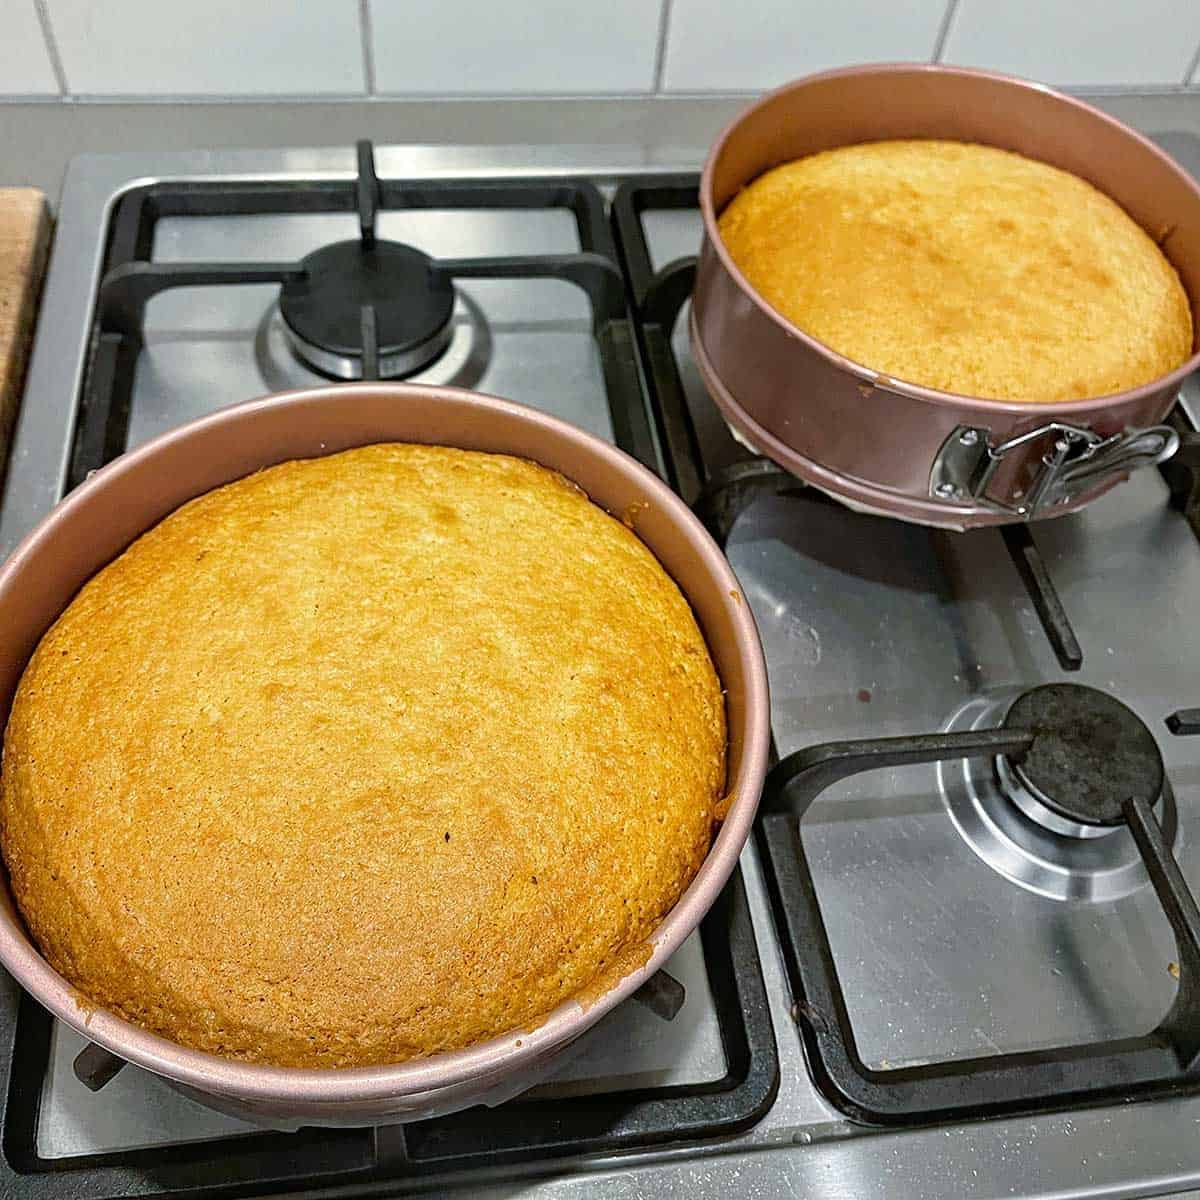 Two vanilla cakes in springform tins cooling on a stove top.